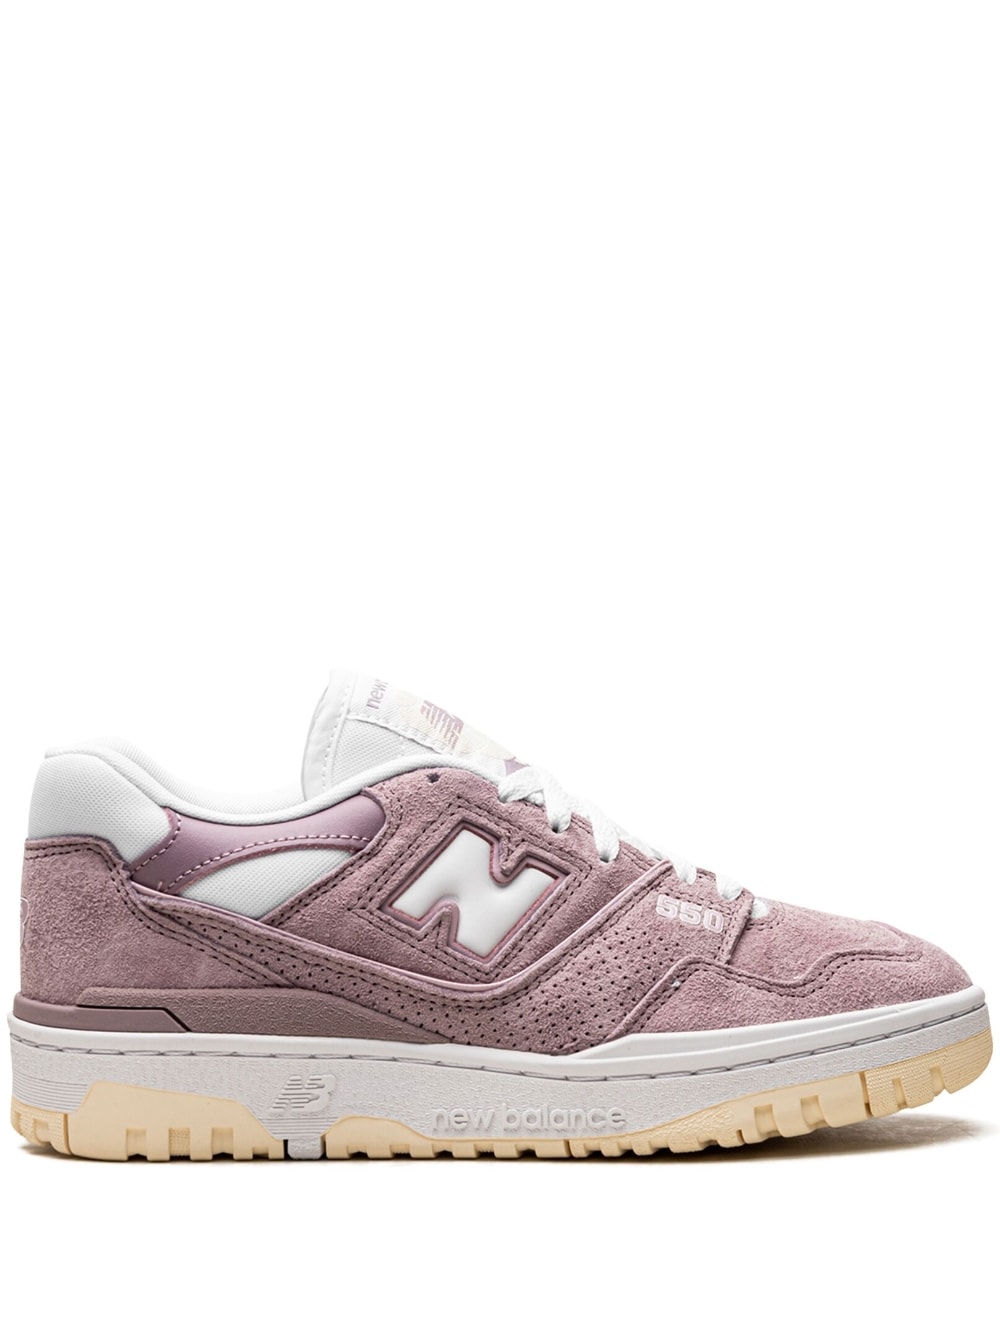 New Balance 550 "Dusty Pink" low-top sneakers